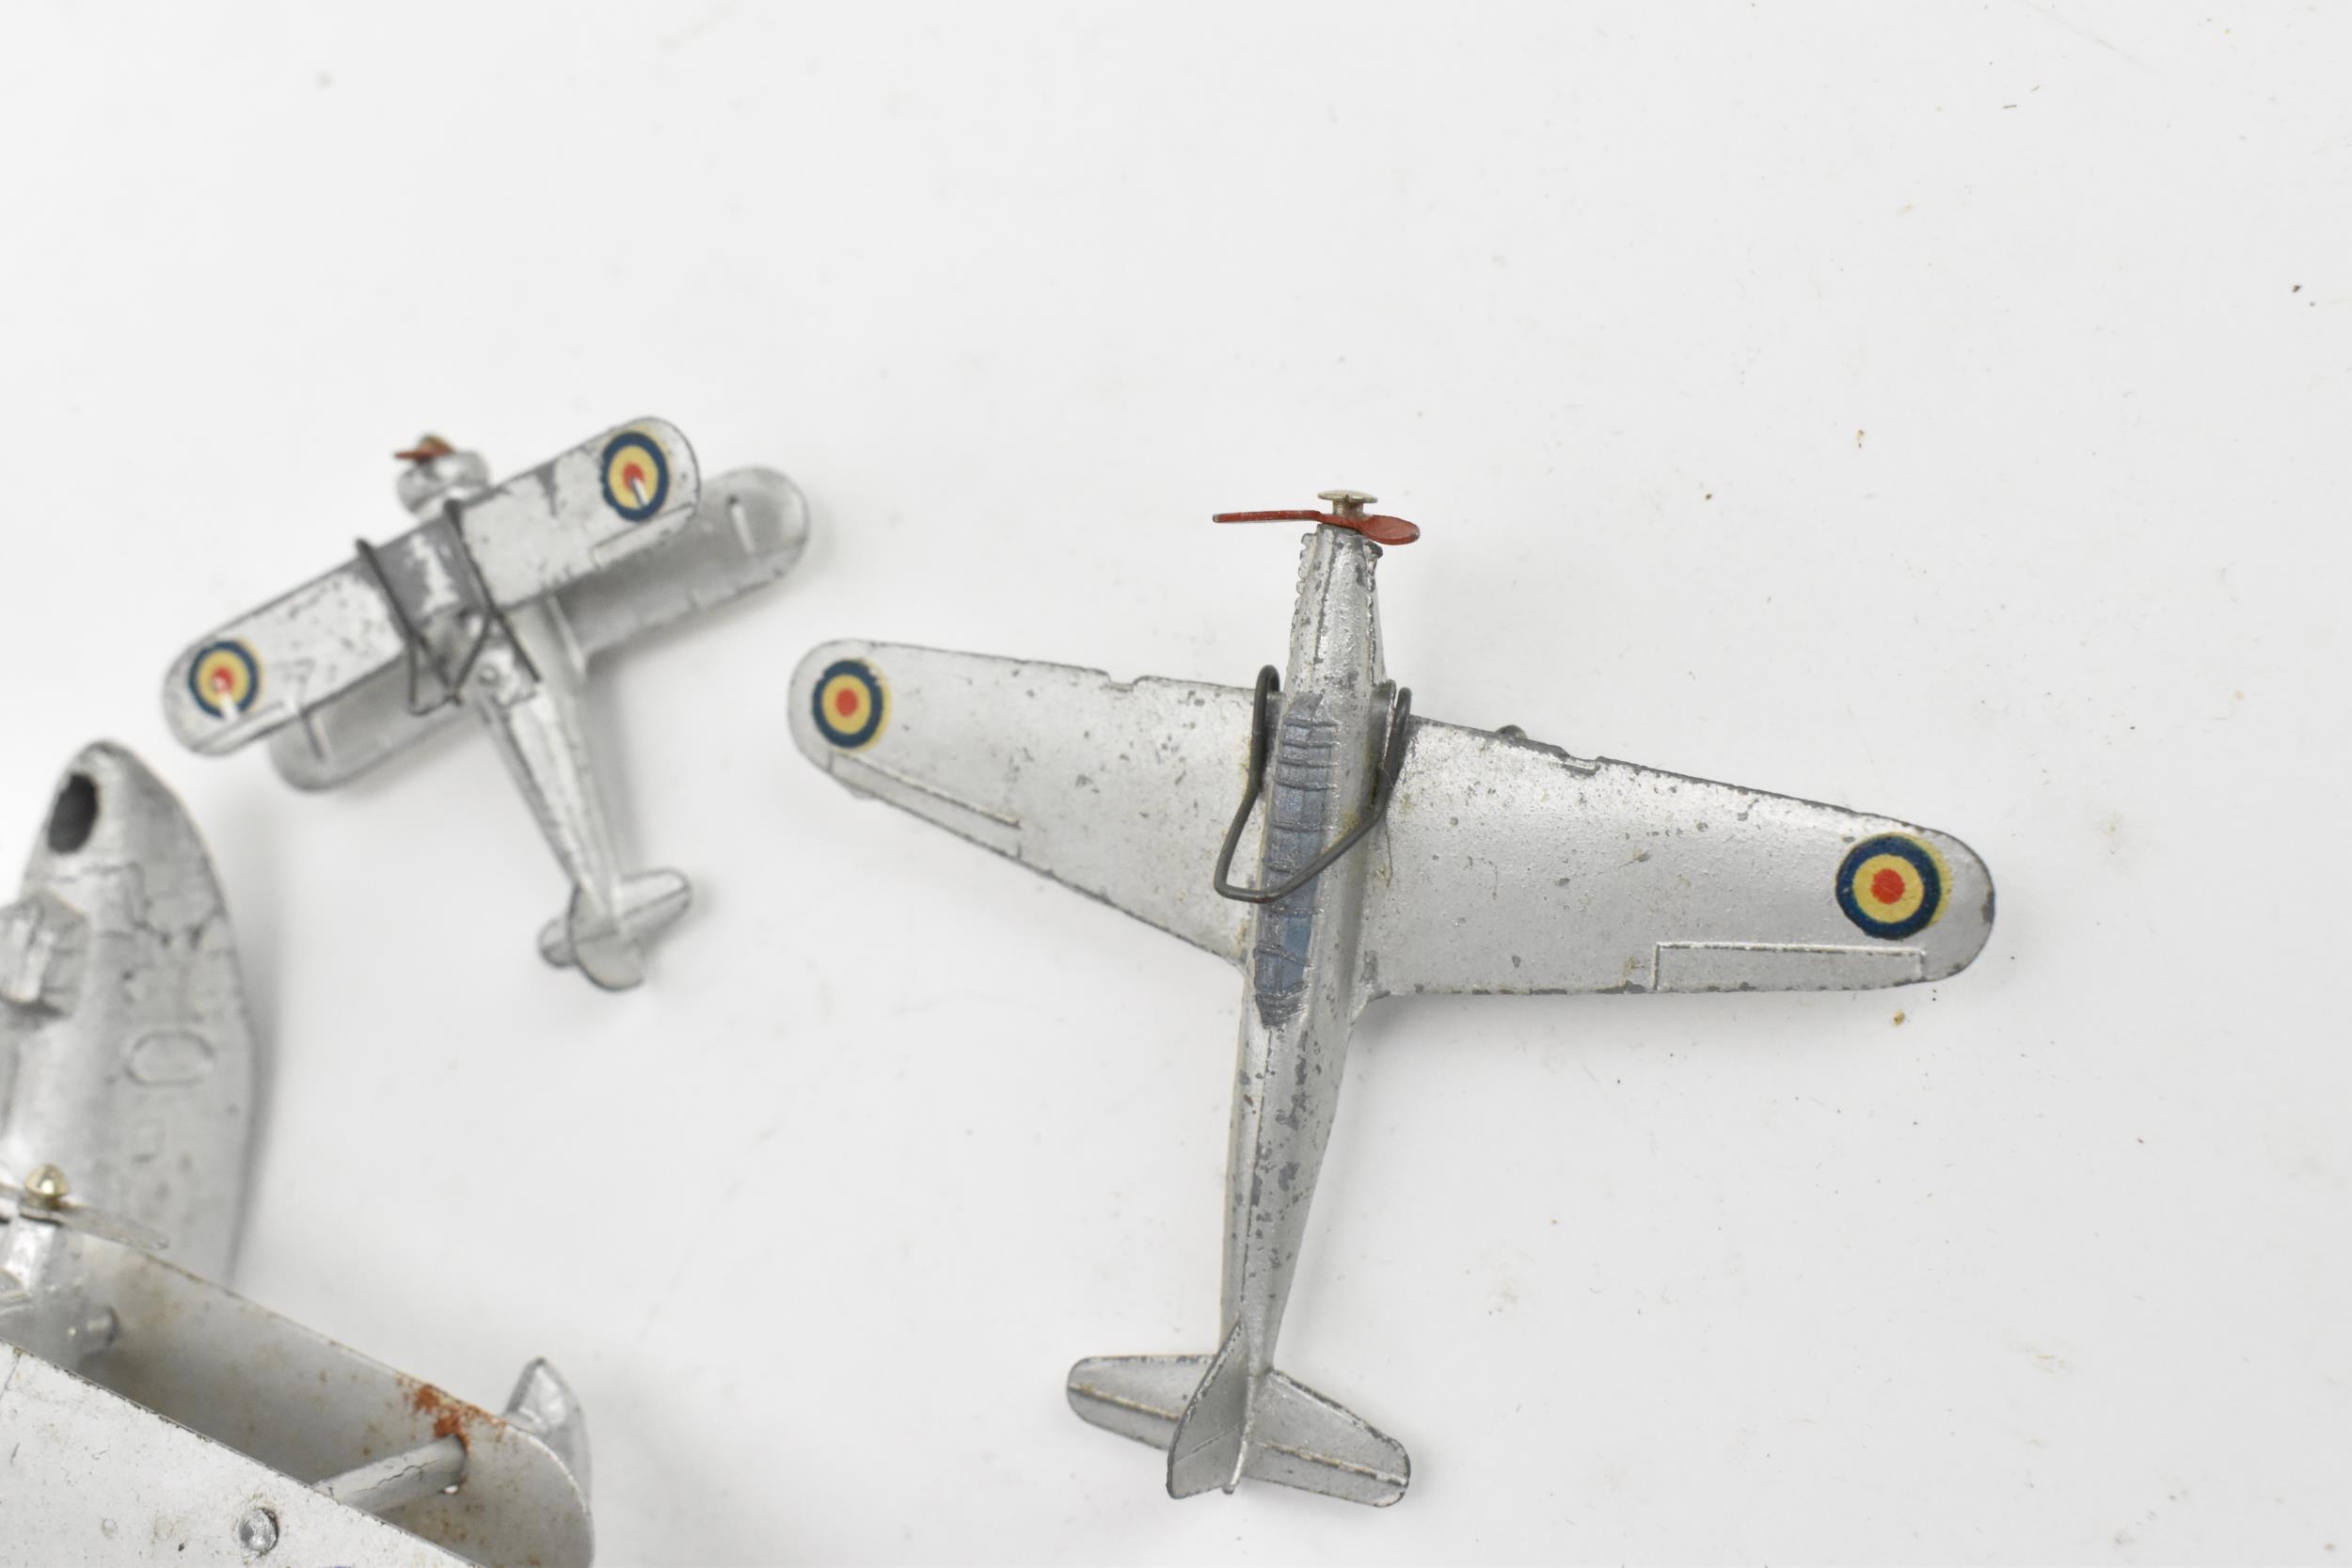 A Dinky Pre-War 61 "RAF" Aeroplane Gift Set to include a Gloster Gladiator Bi-Plane; Fairey Battle - Image 5 of 6